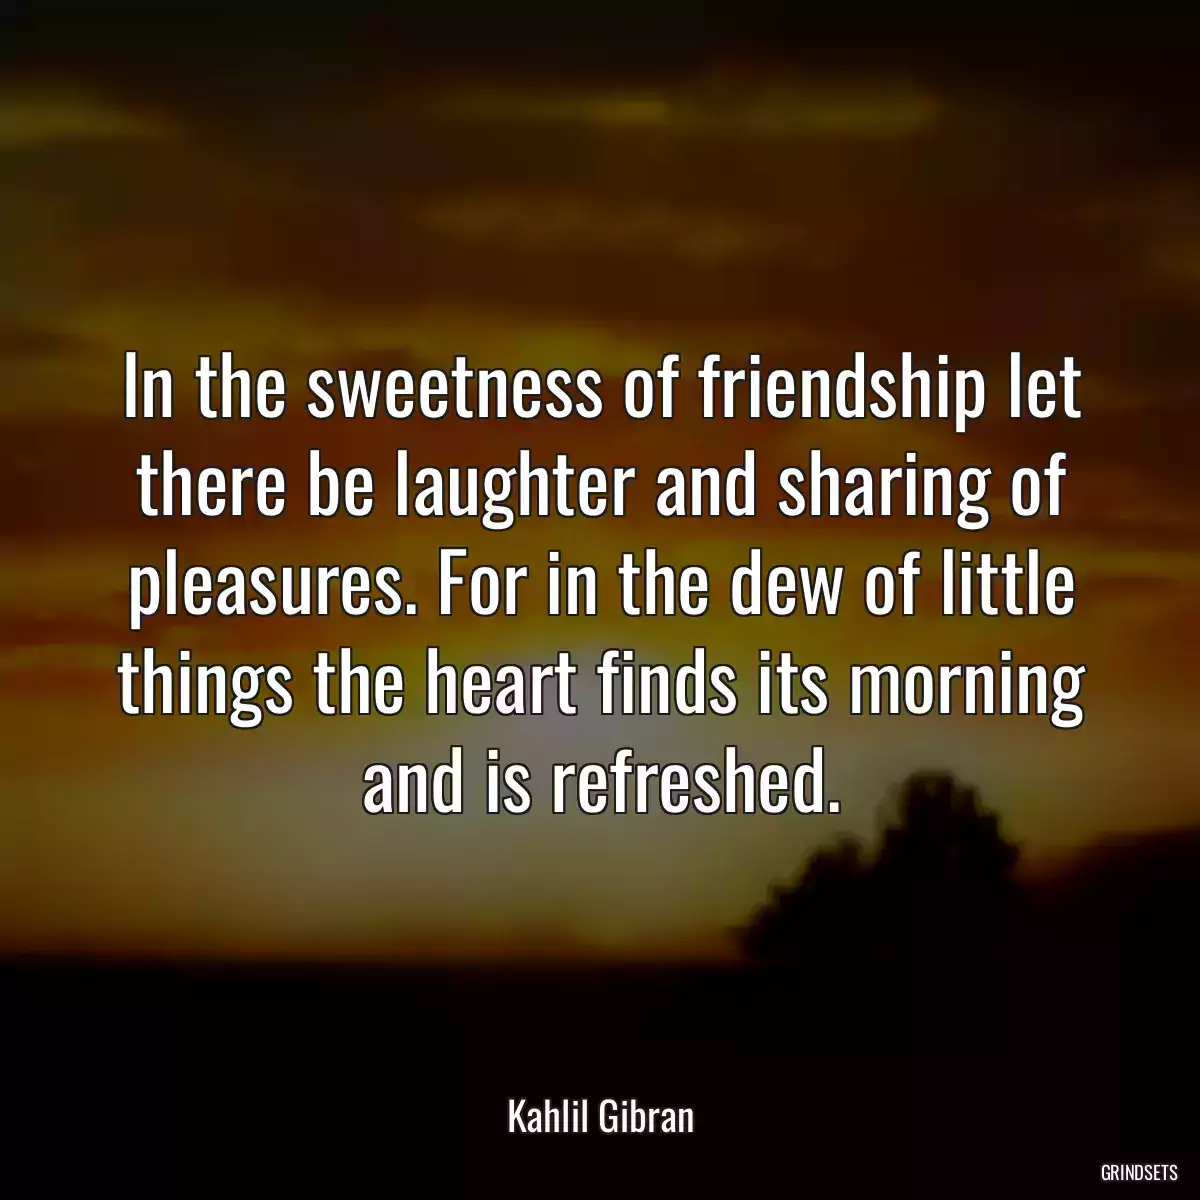 In the sweetness of friendship let there be laughter and sharing of pleasures. For in the dew of little things the heart finds its morning and is refreshed.